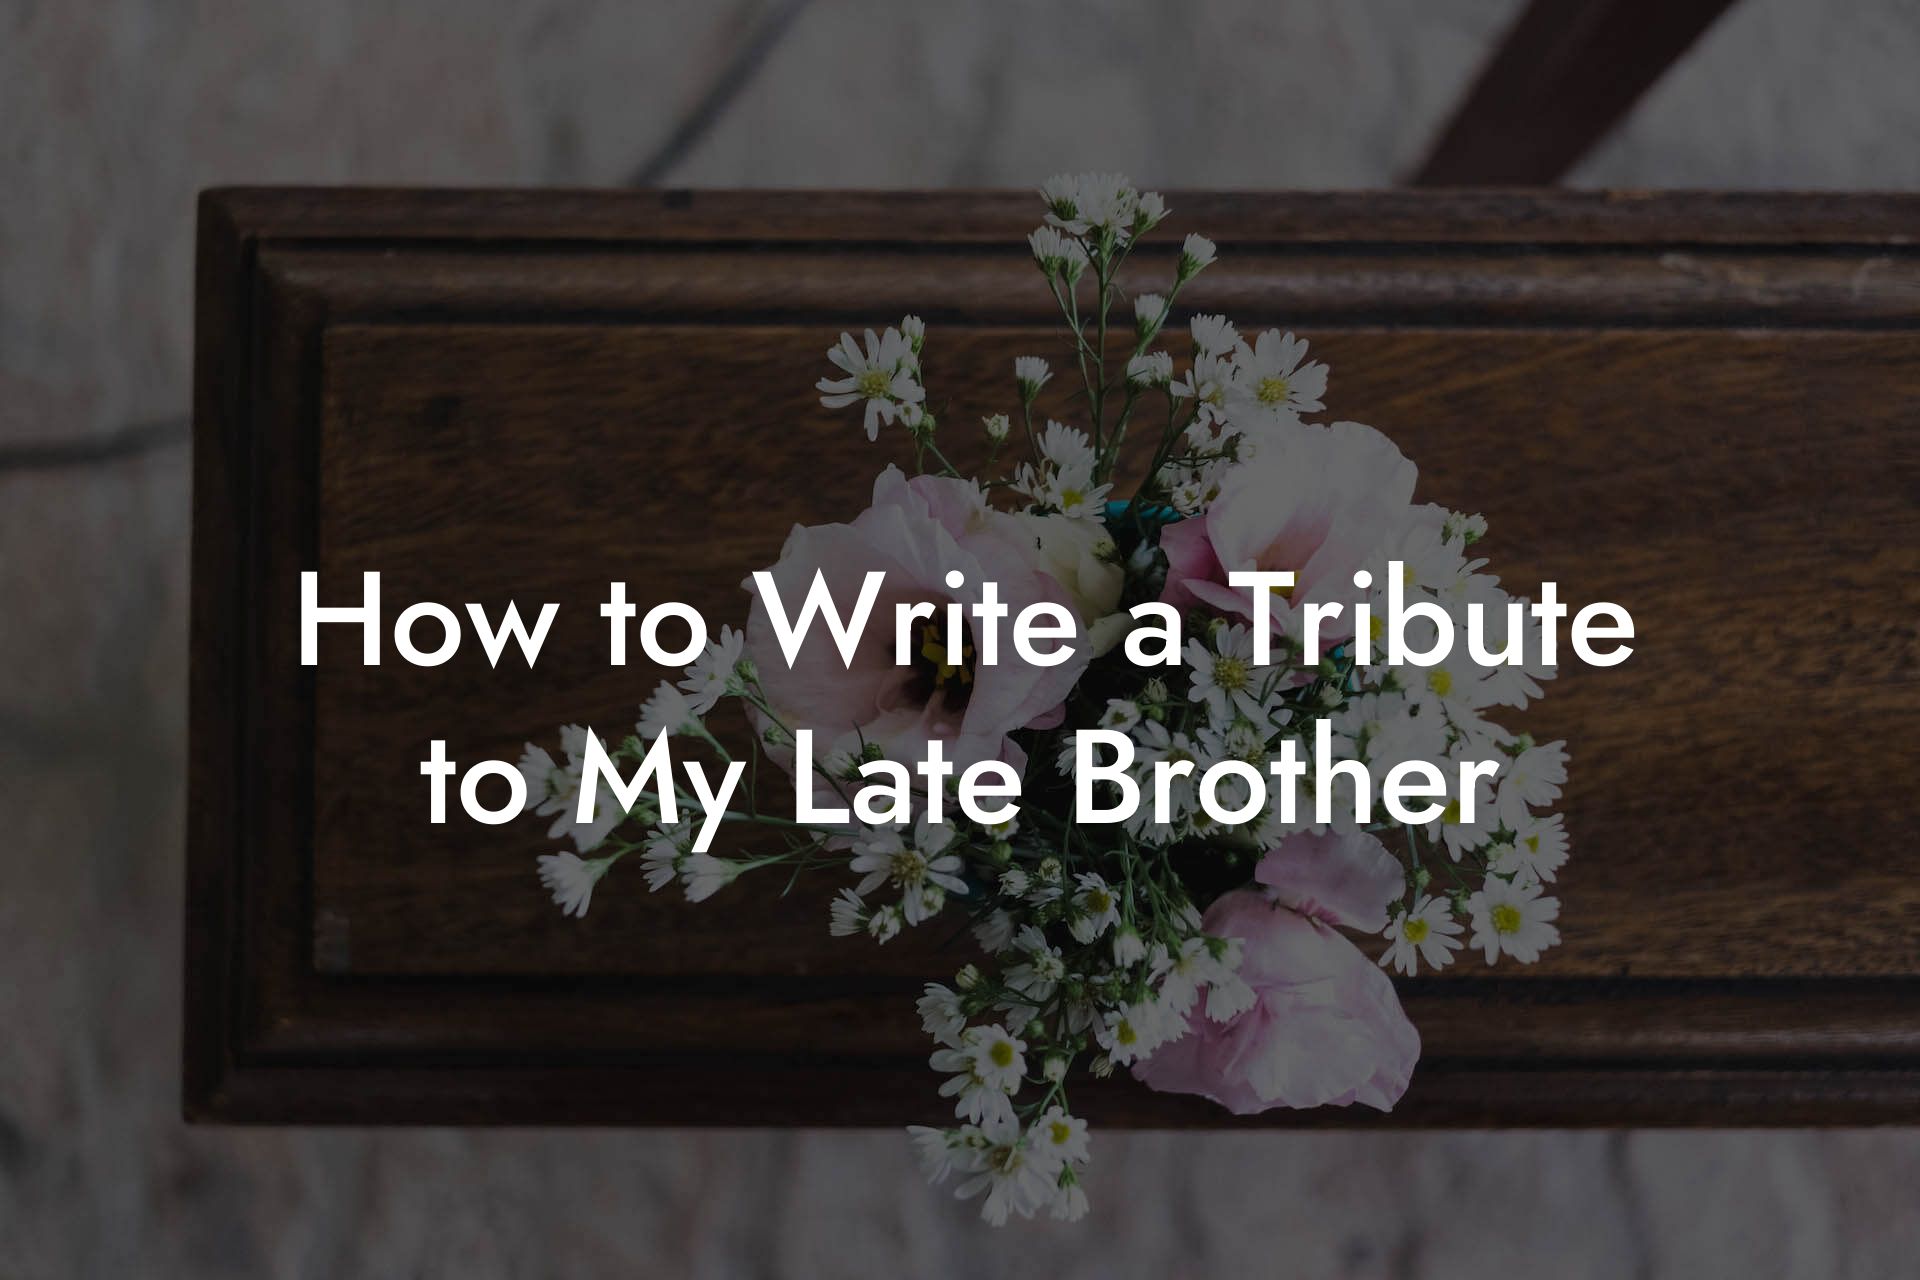 How to Write a Tribute to My Late Brother